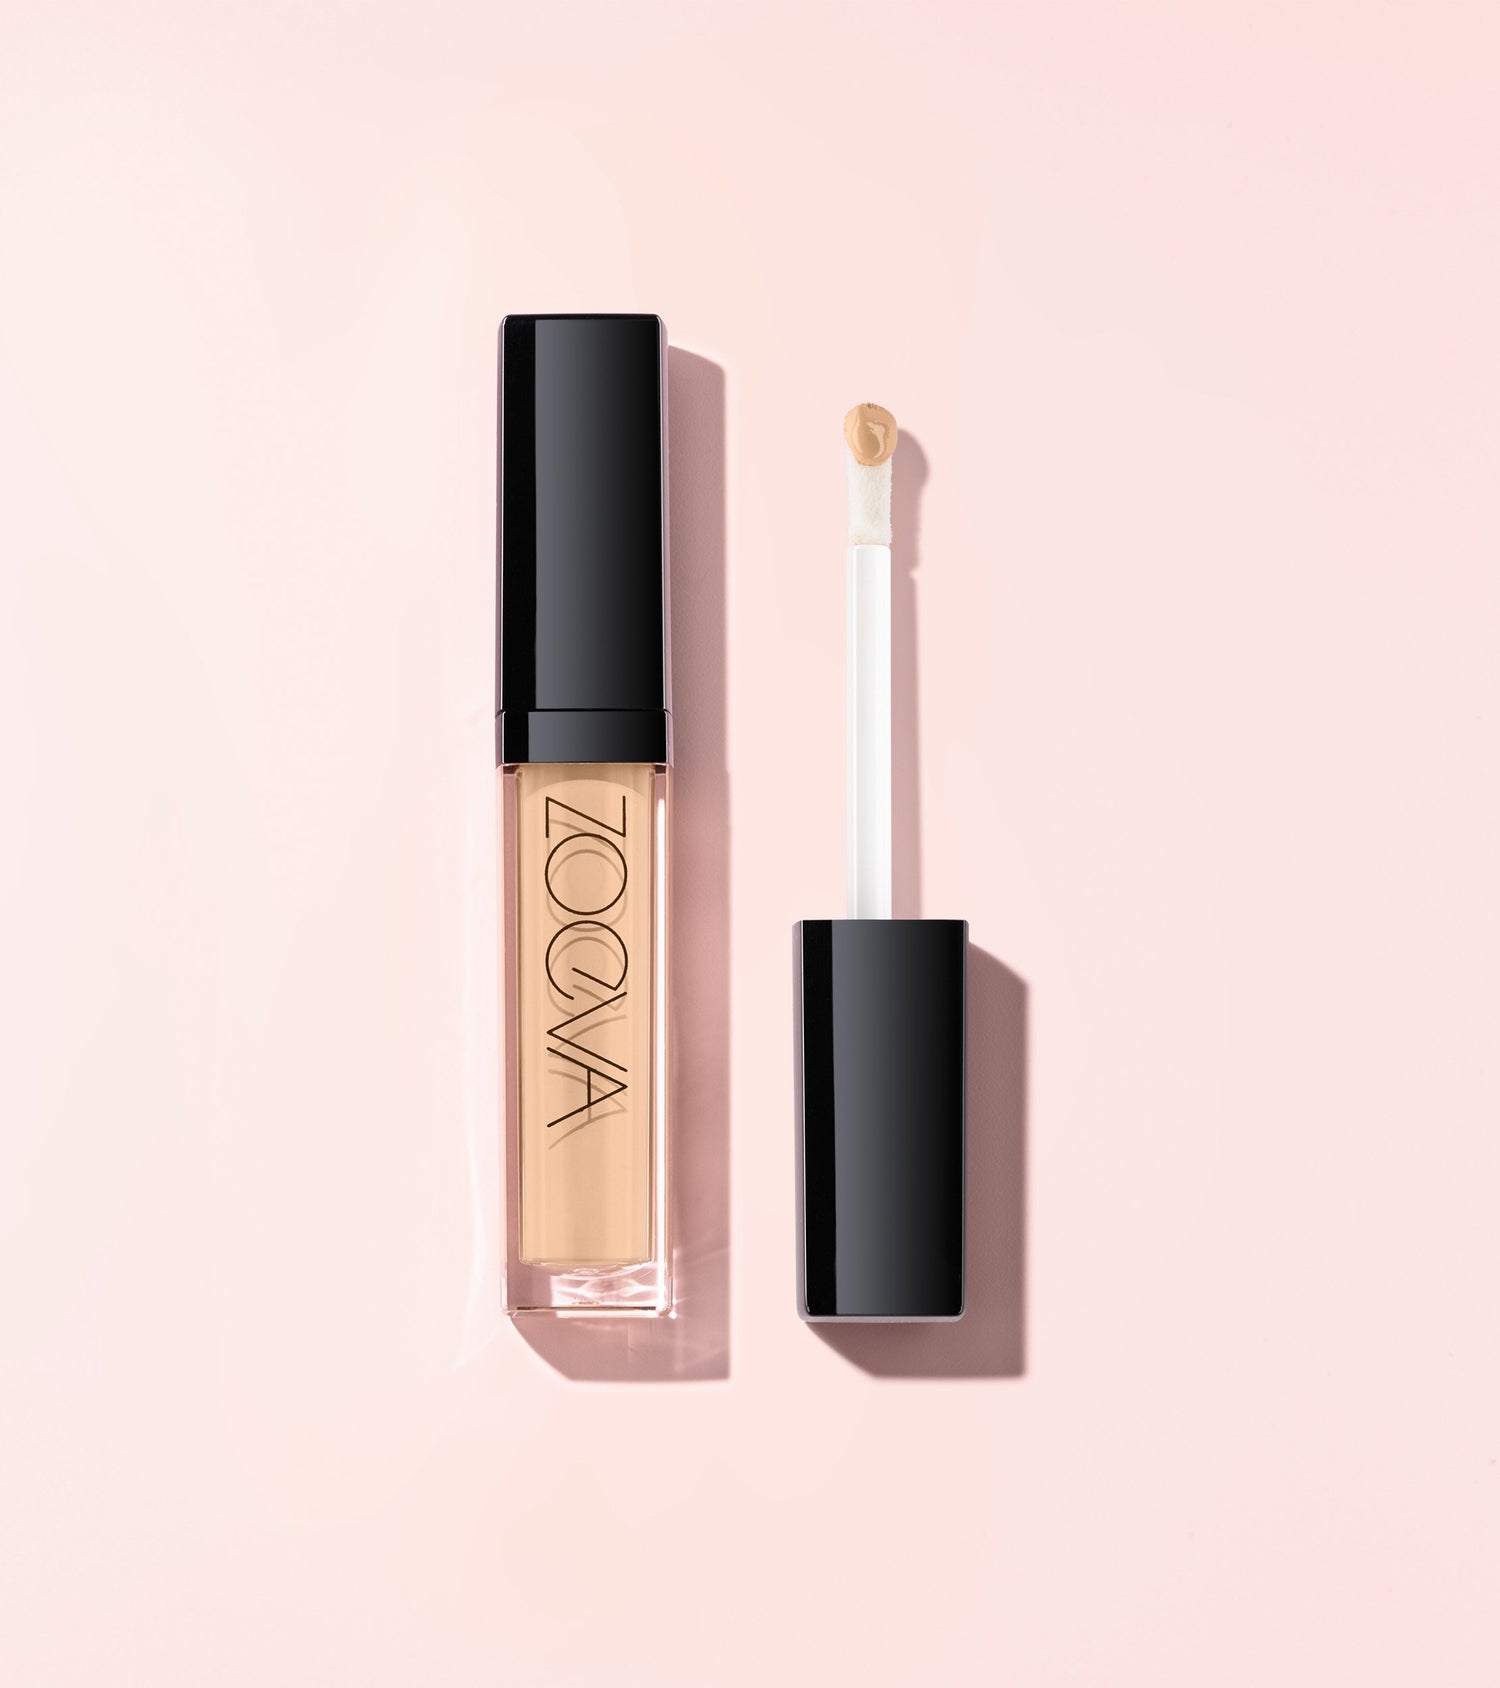 AUTHENTIK SKIN PERFECTOR CONCEALER (130 FOR REAL) Main Image featured